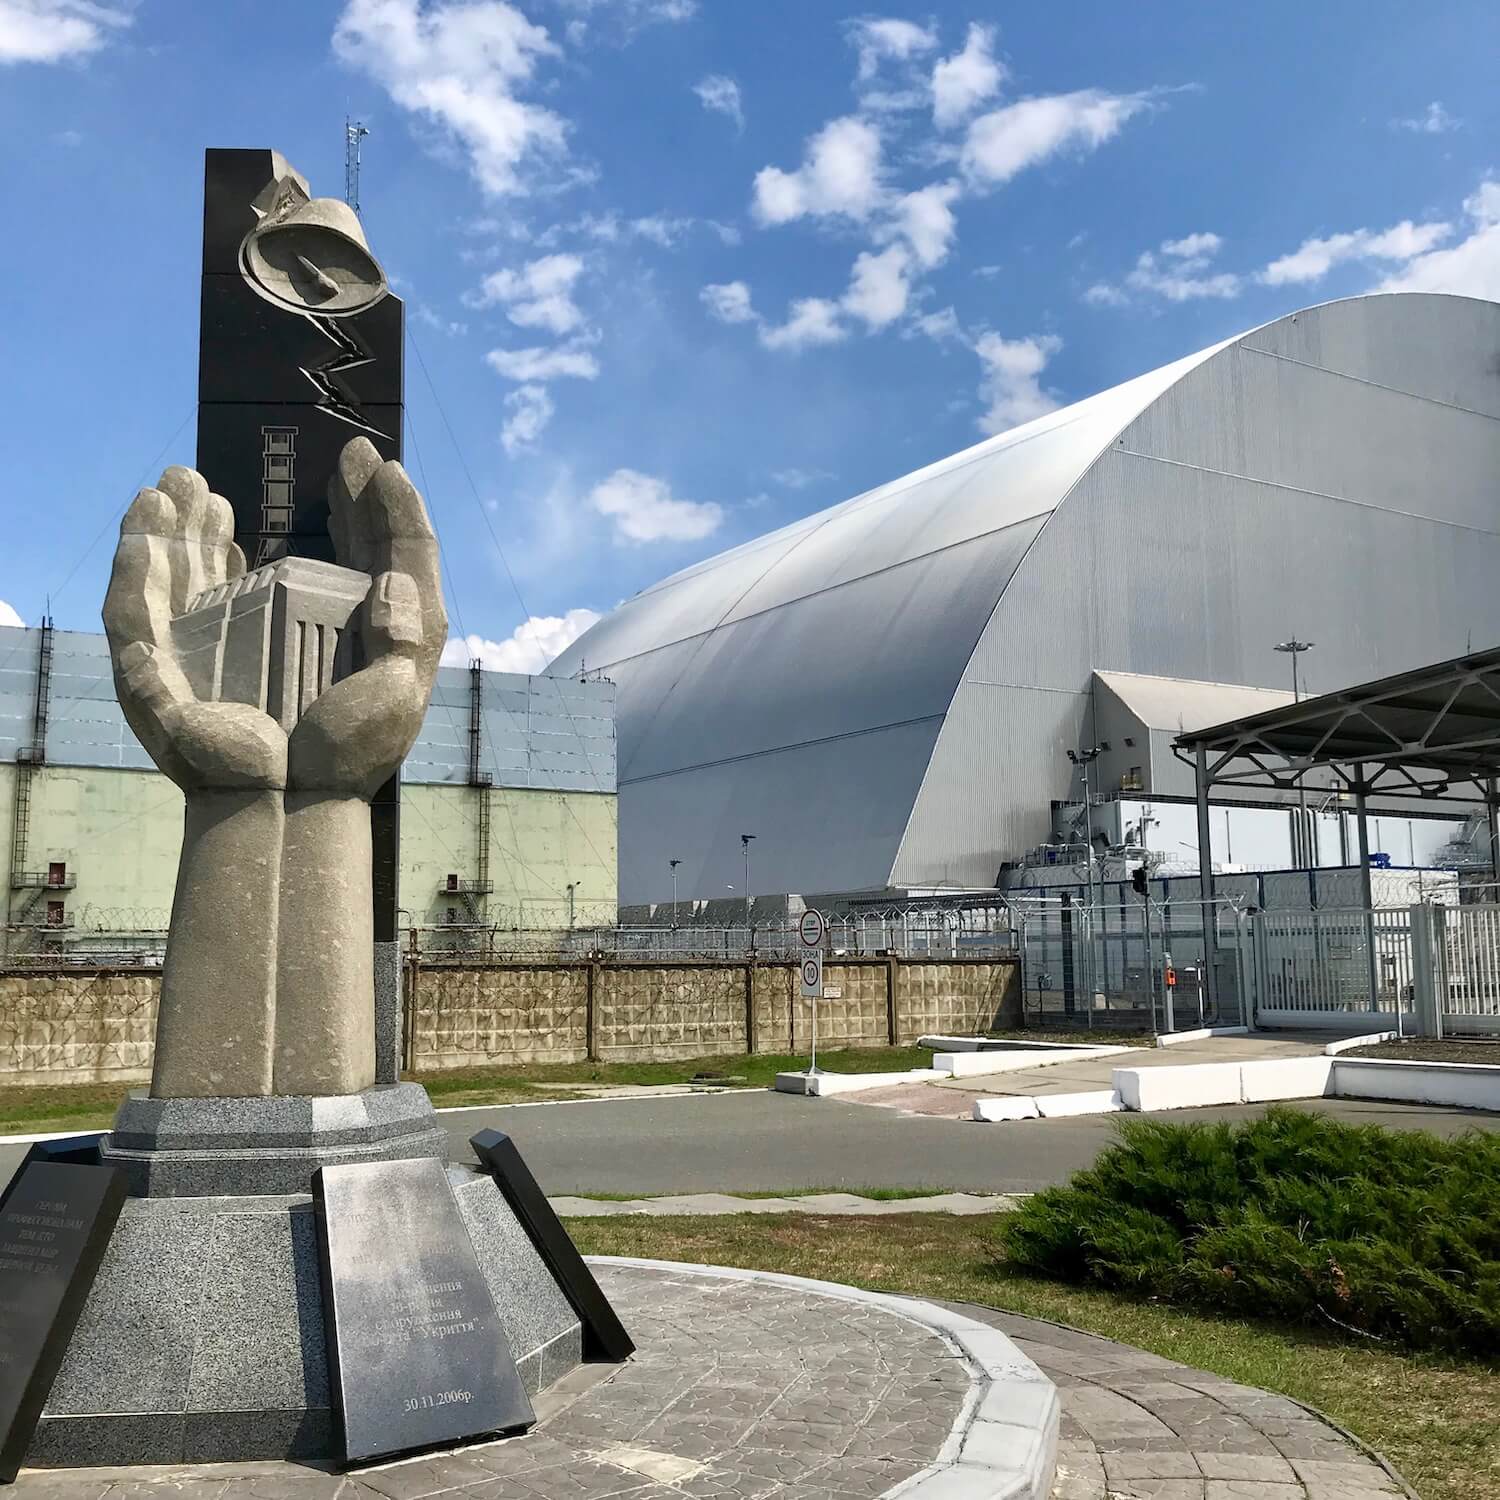 A monument to commemorate the tragic steam explosion at Chernobyl Reactor #4 that took place in April 1986. The monument is a sculpted hand reaching out from a granite pedestal. In the hand is a building that represents the reactor. The the background behind the monument is the new titanium sarcophagus which covers the remains of the reactor.